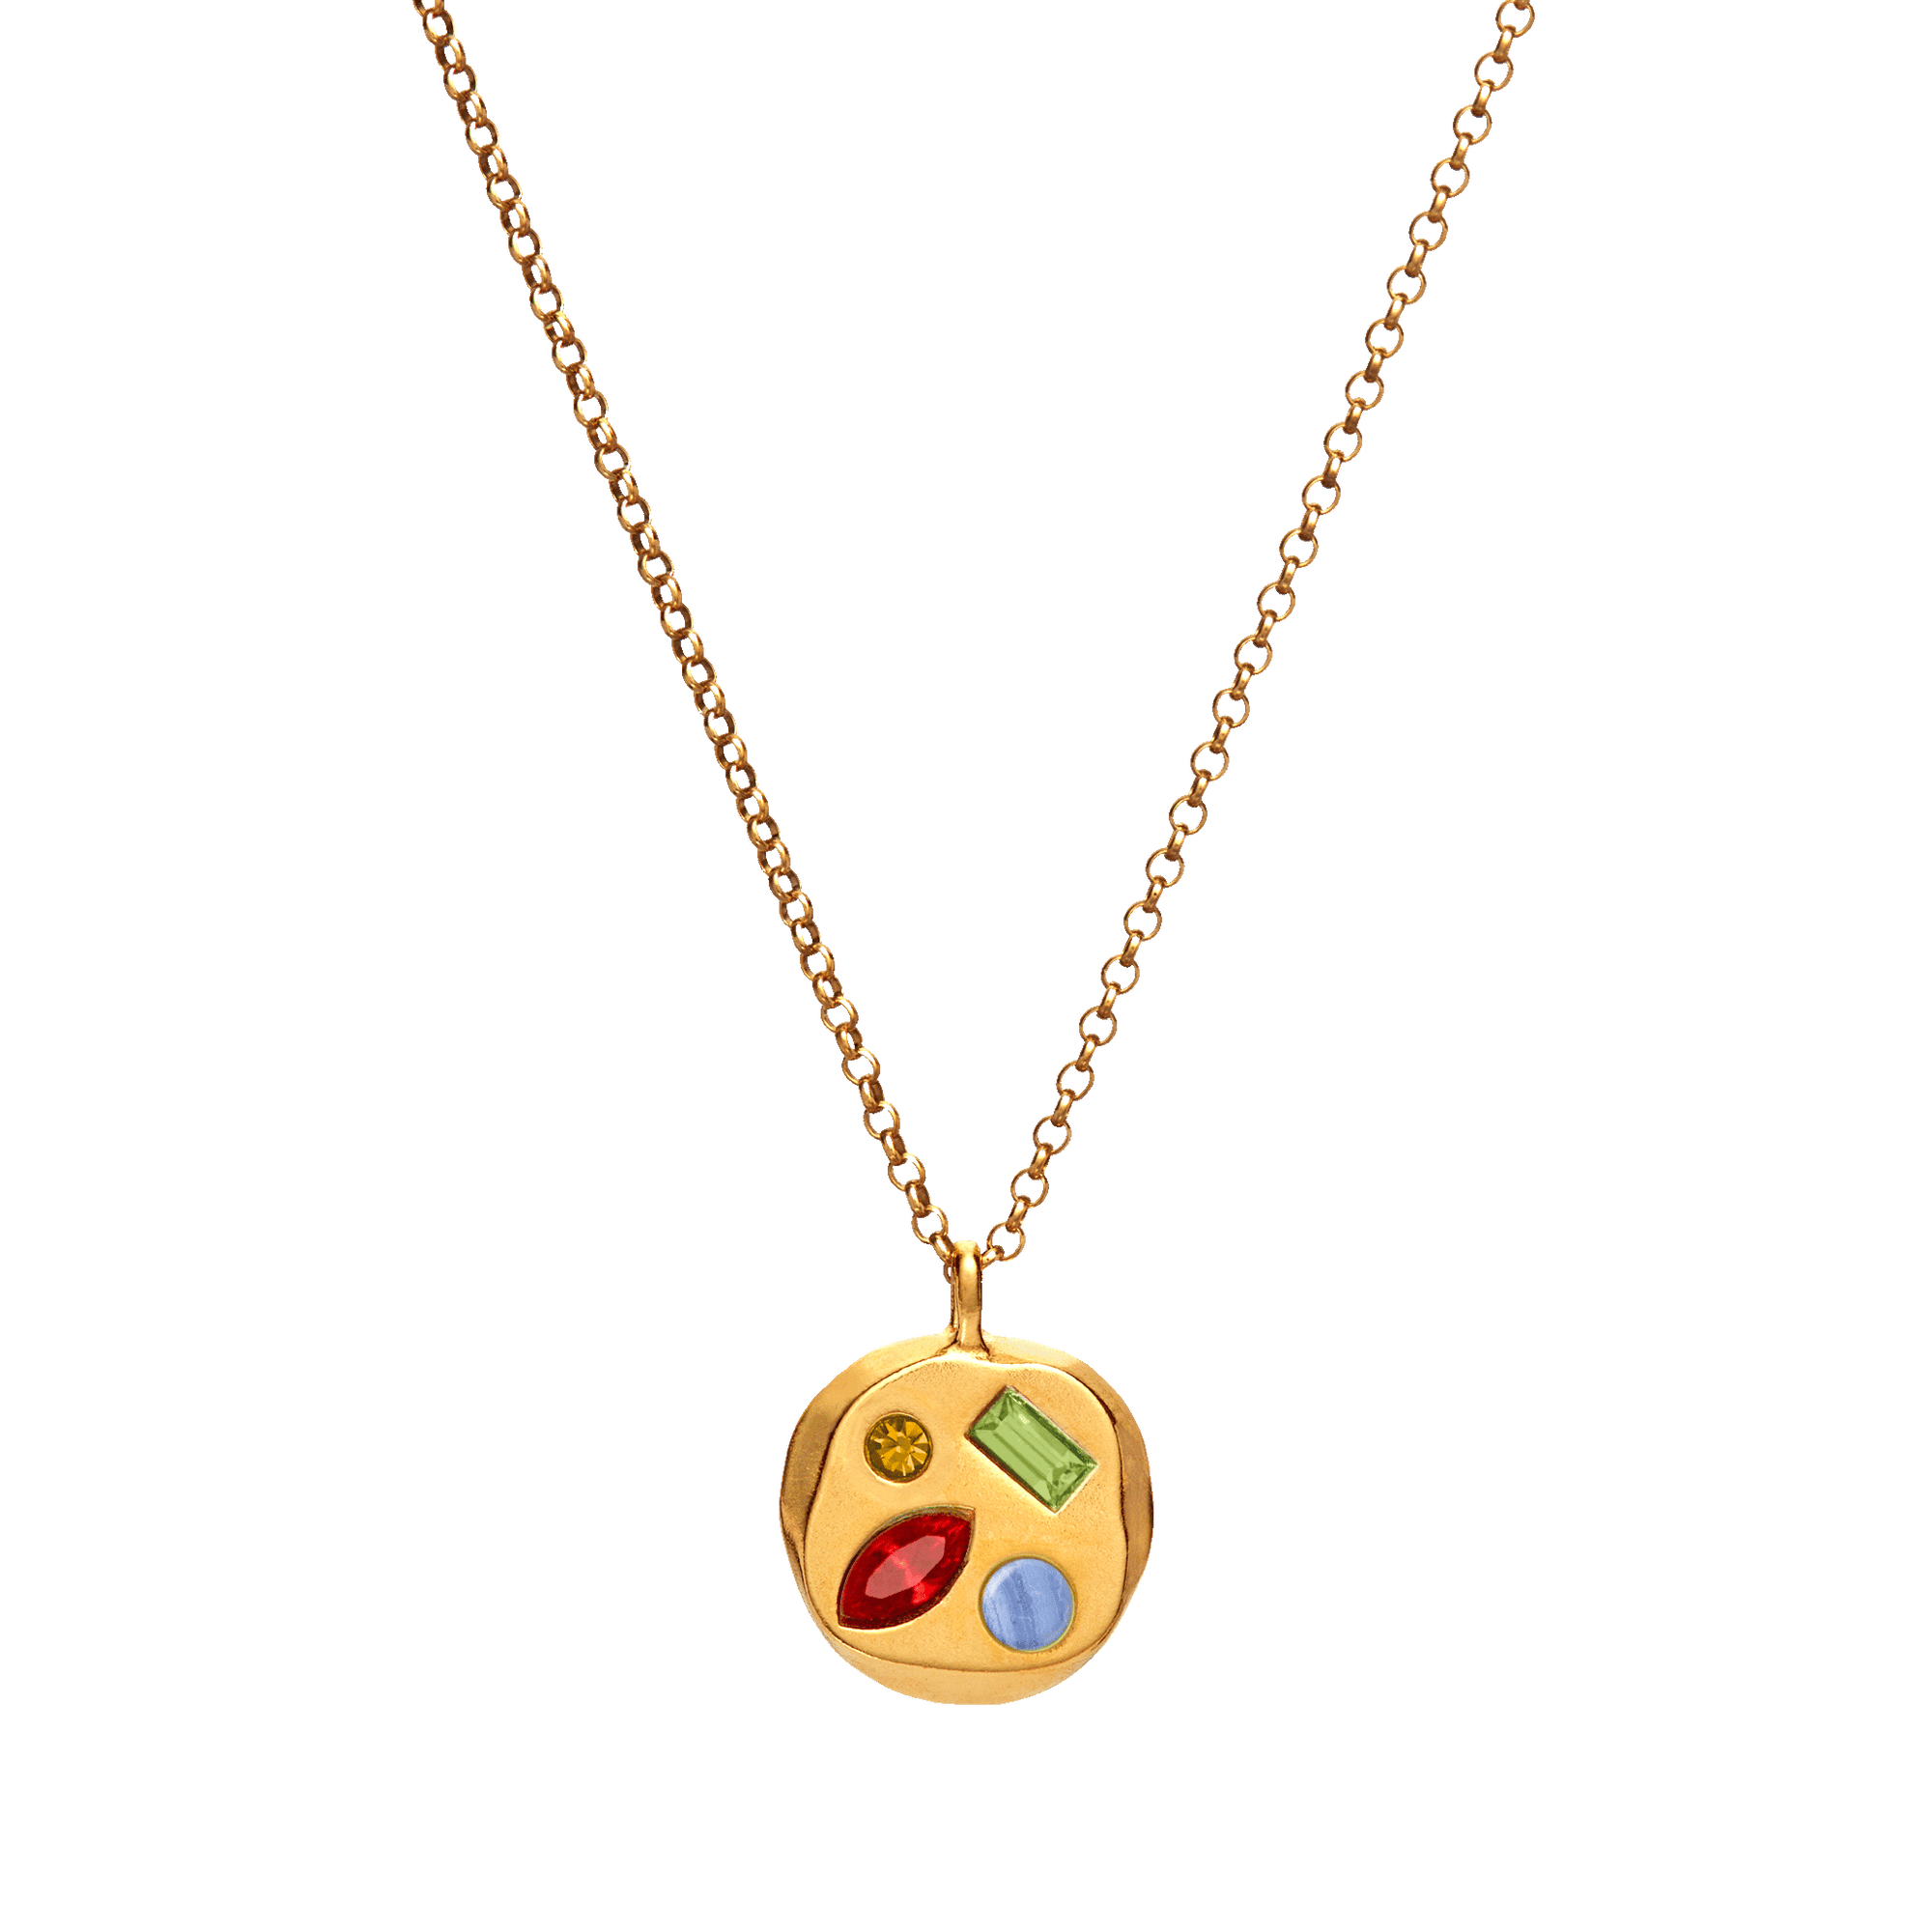 The July Tenth Pendant